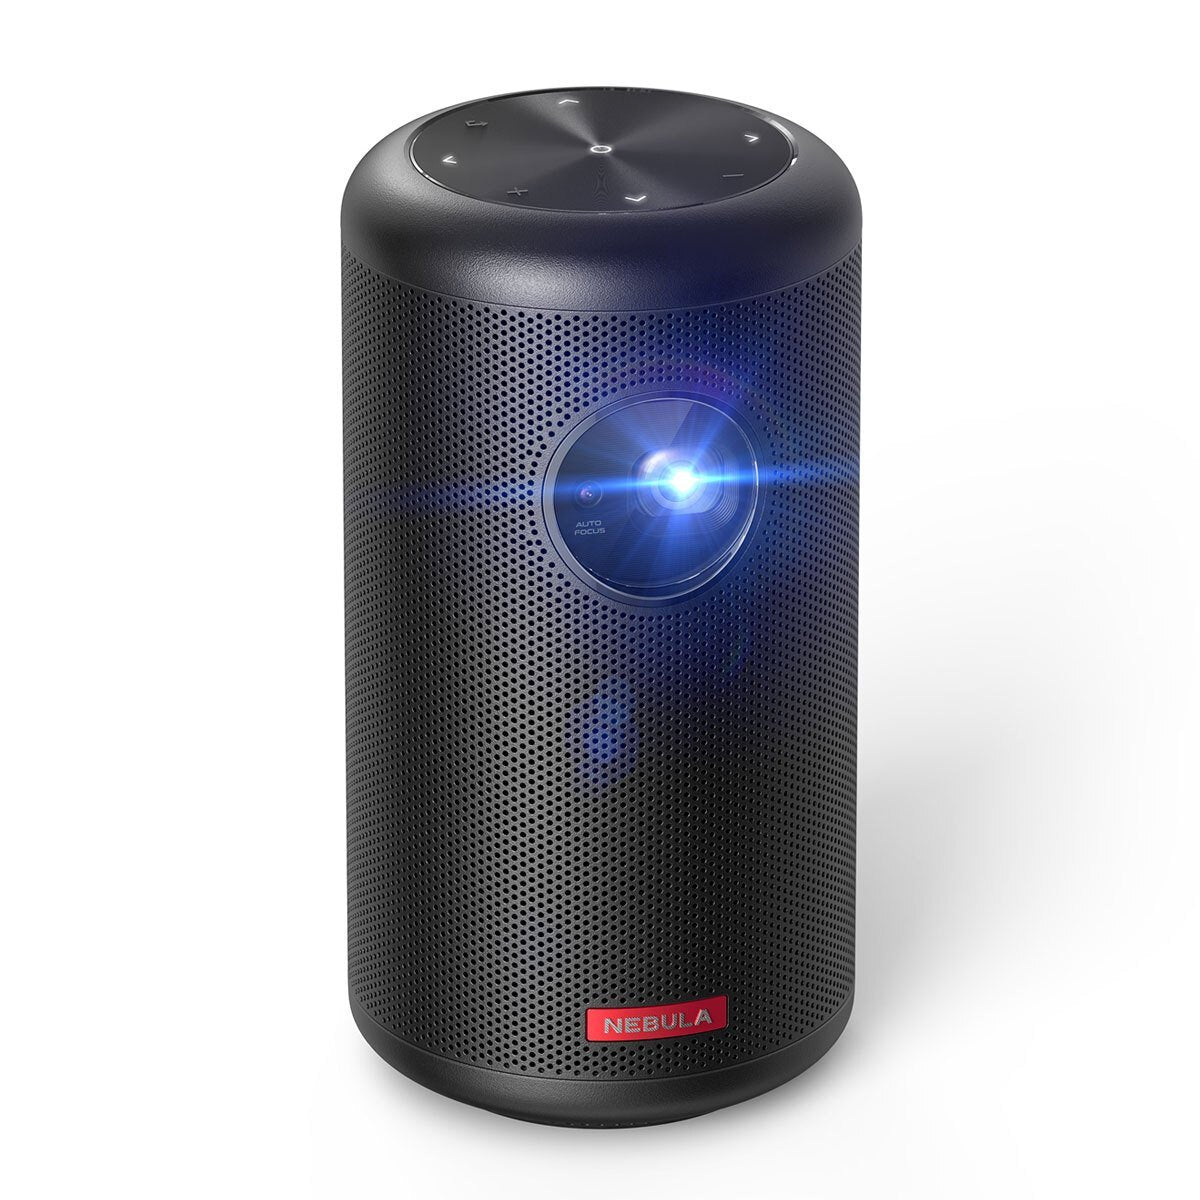 Anker Nebula Capsule II Android Pocket 200 ANSI Lumen Projector, D2421V11 - Signature Retail Stores